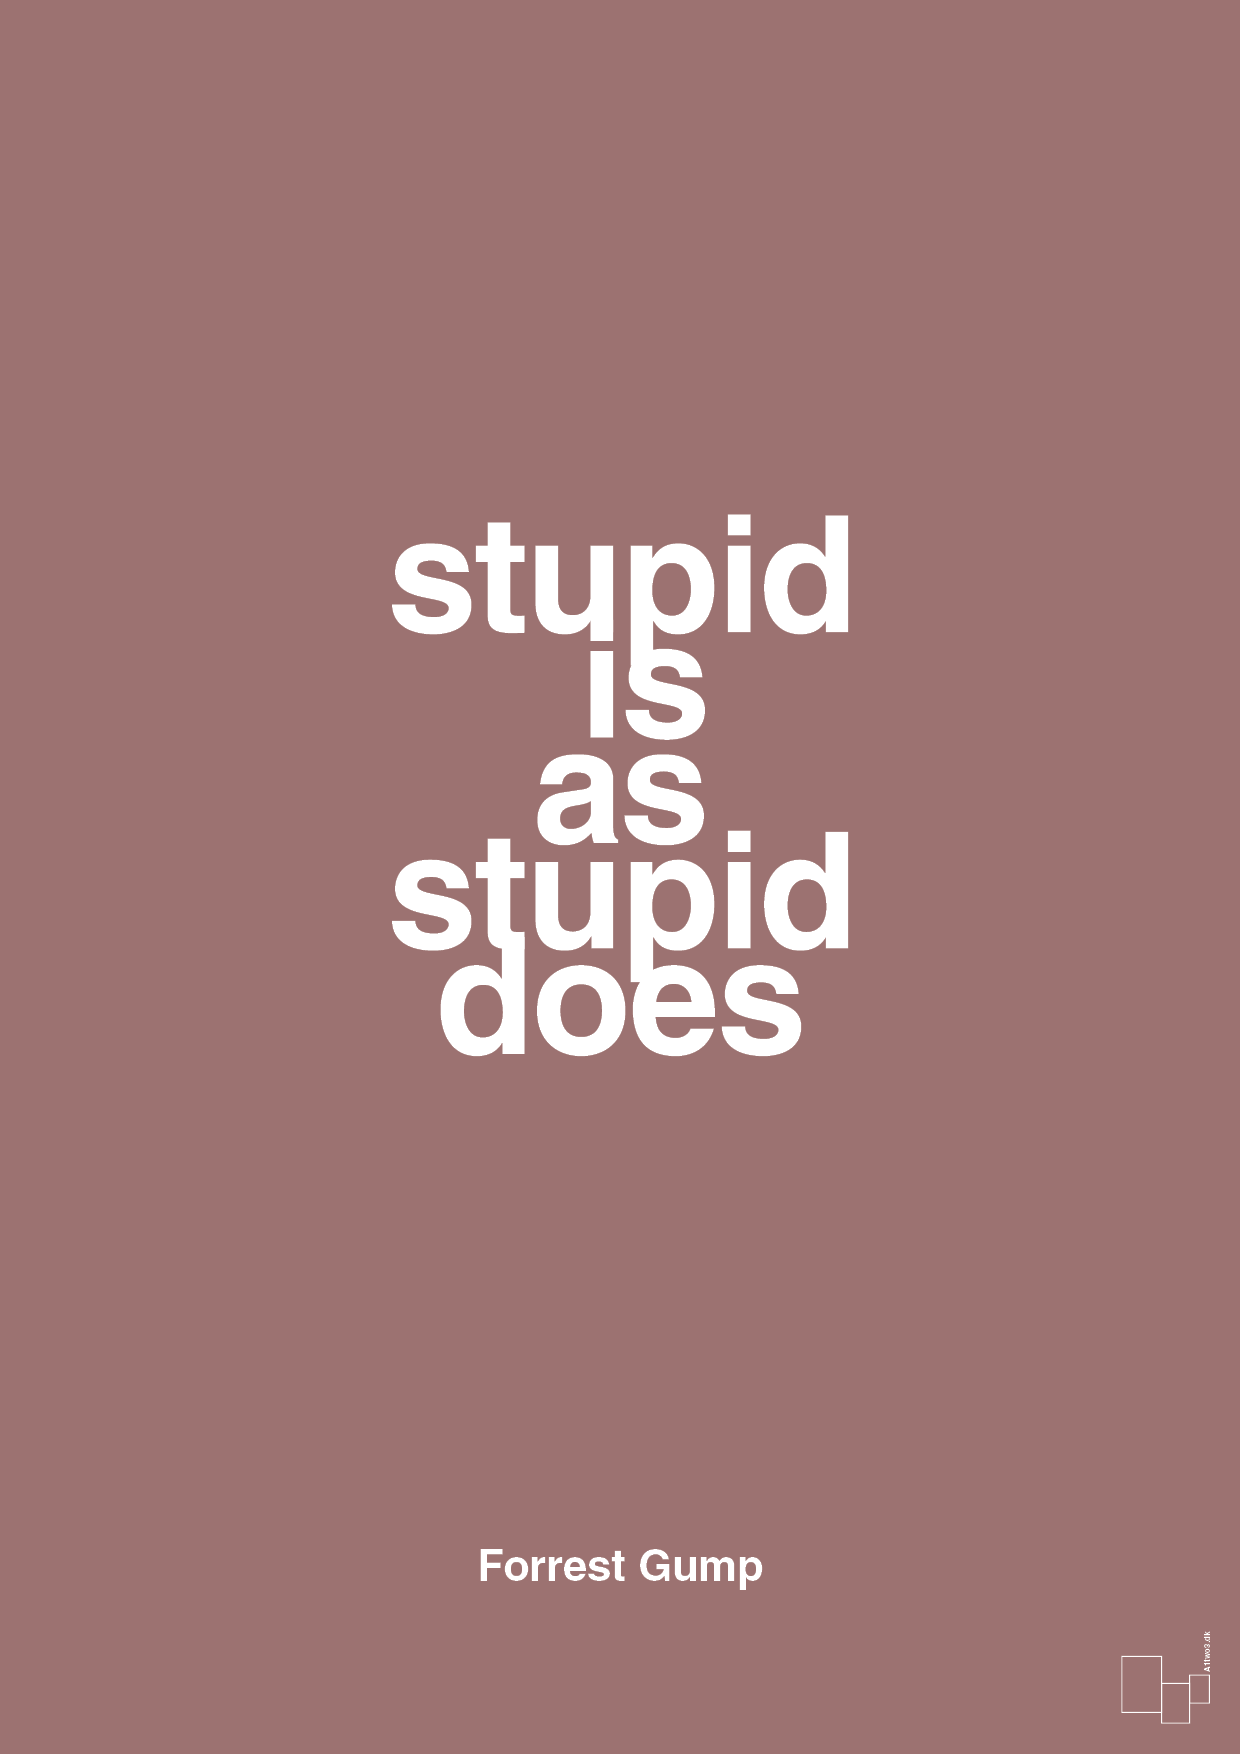 stupid is as stupid does - Plakat med Citater i Plum